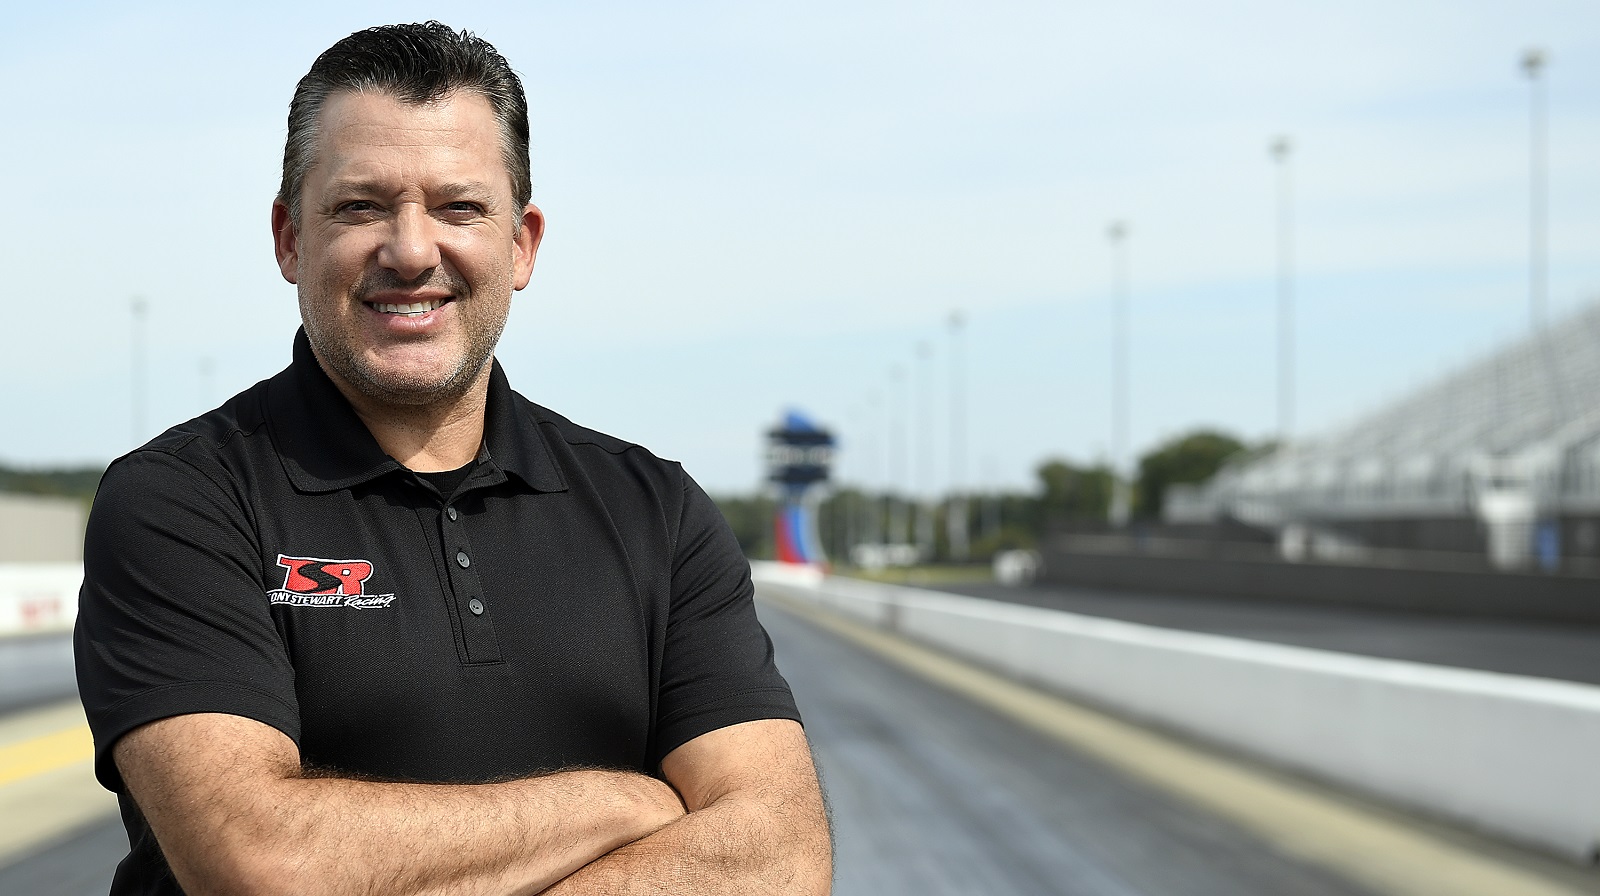 Tony Stewart co-founded the Superstar Racing Experience and drove in the debut season of the series in 2021. | Mike Comer/Getty Images